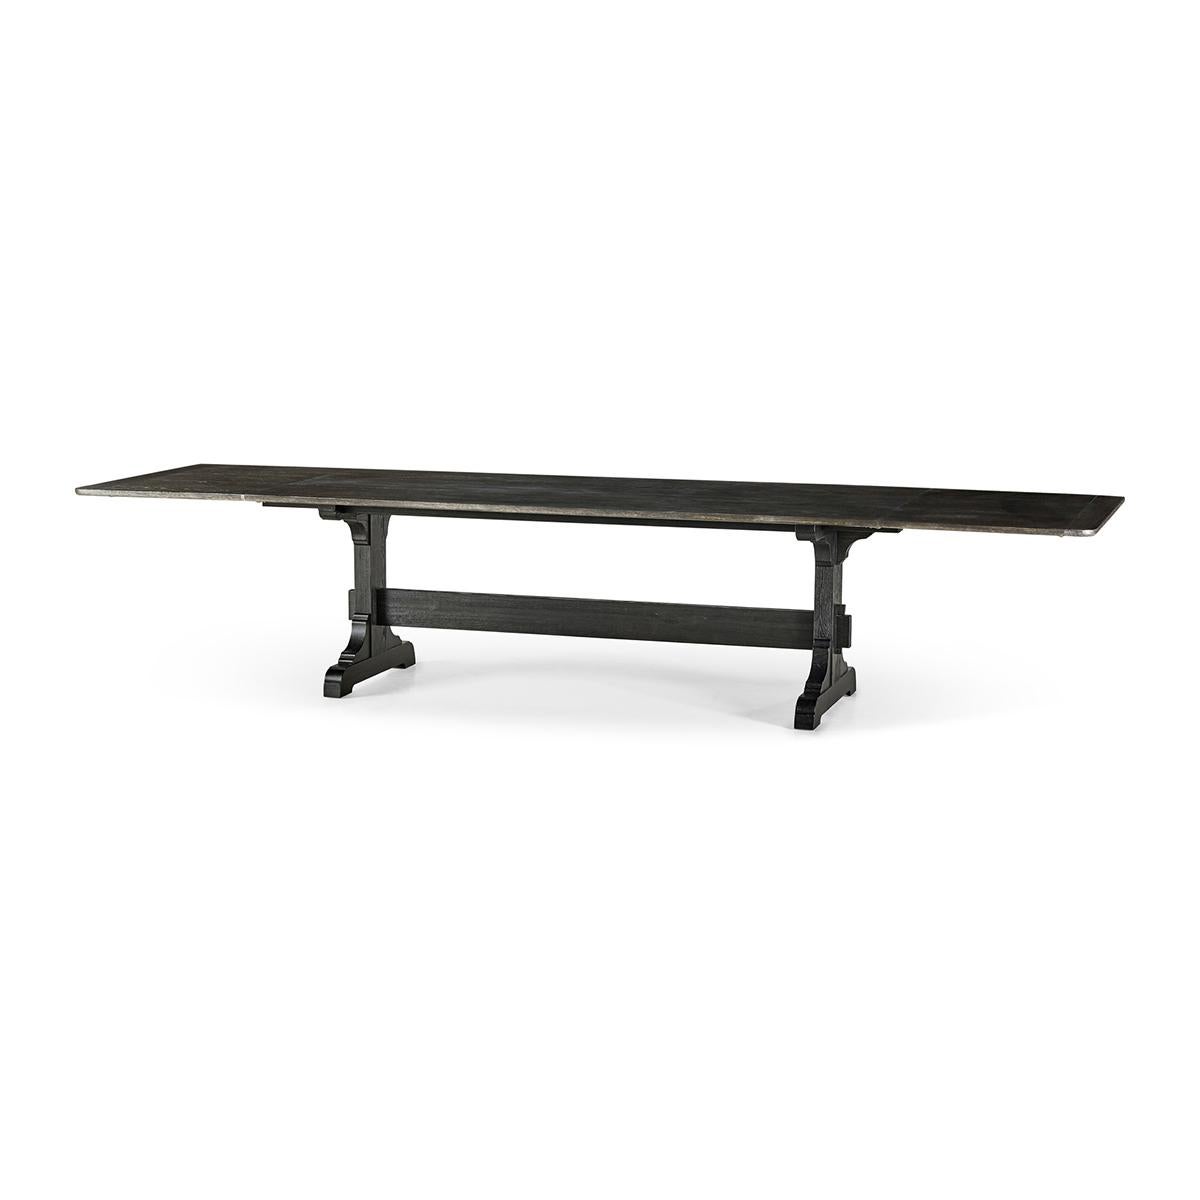 Dark European Ash Trestle end dining table, this extension table opens to 148